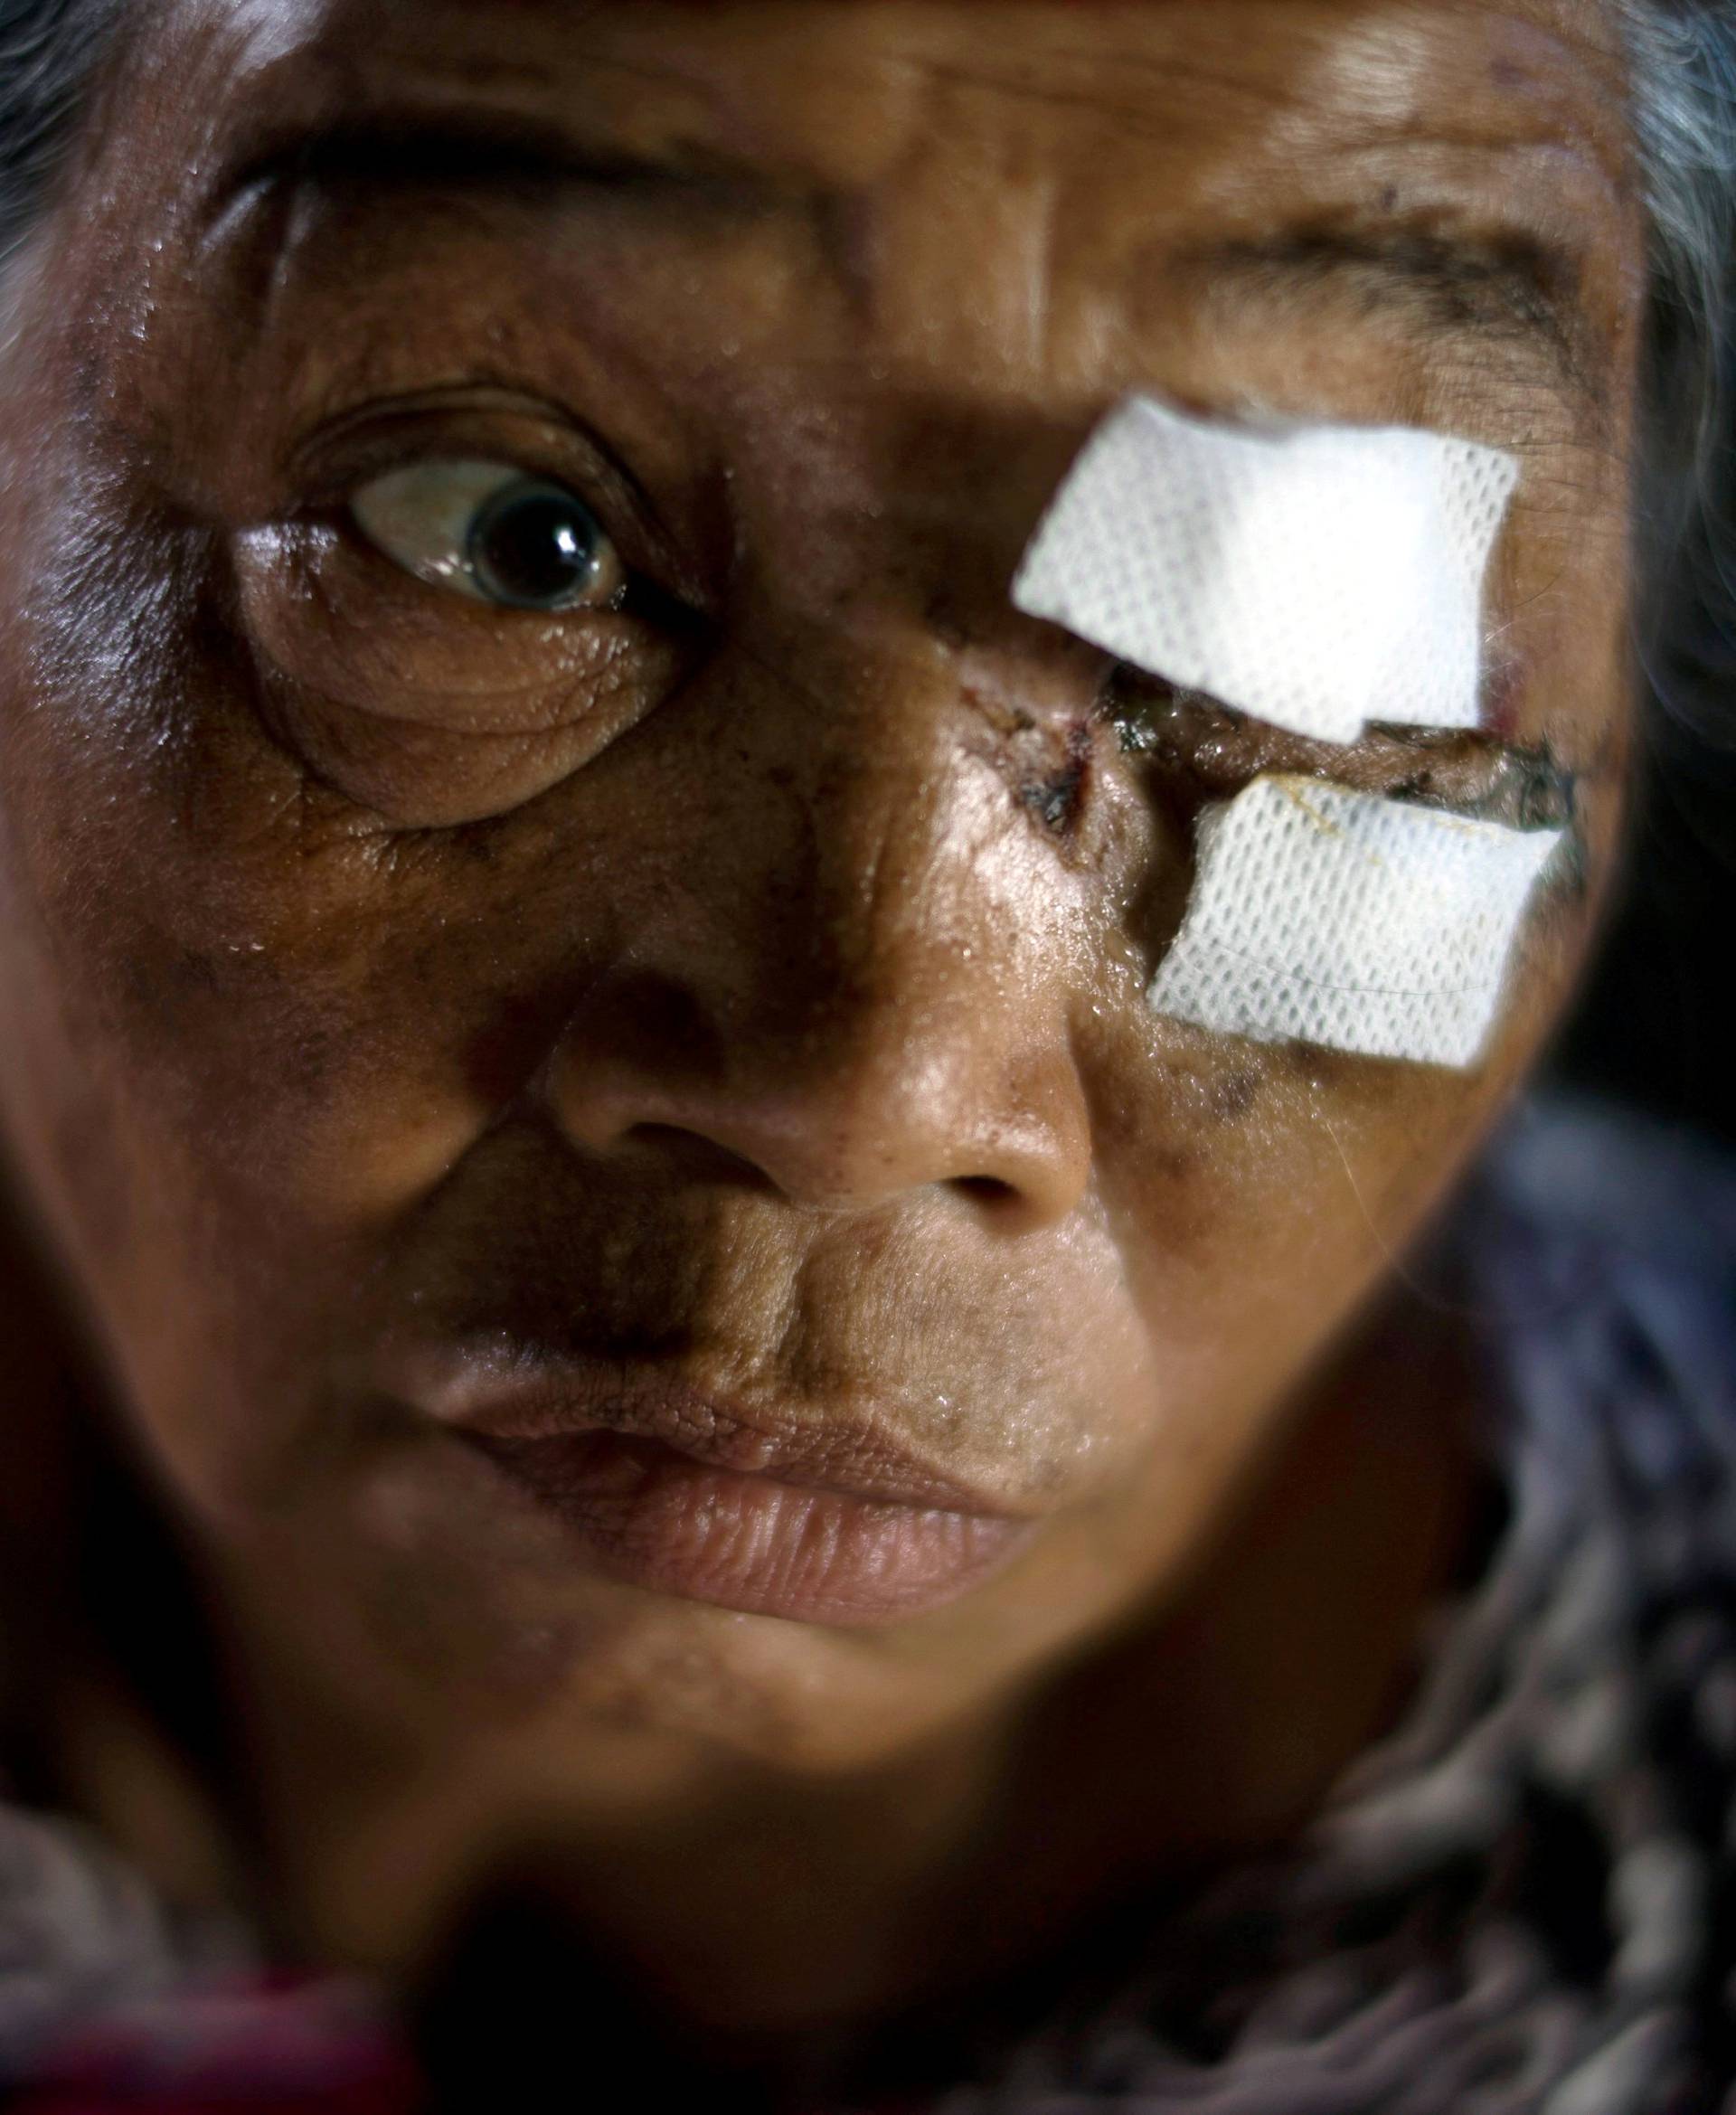 A villager affected by an earthquake and tsunami is pictured at a hospital in Palu